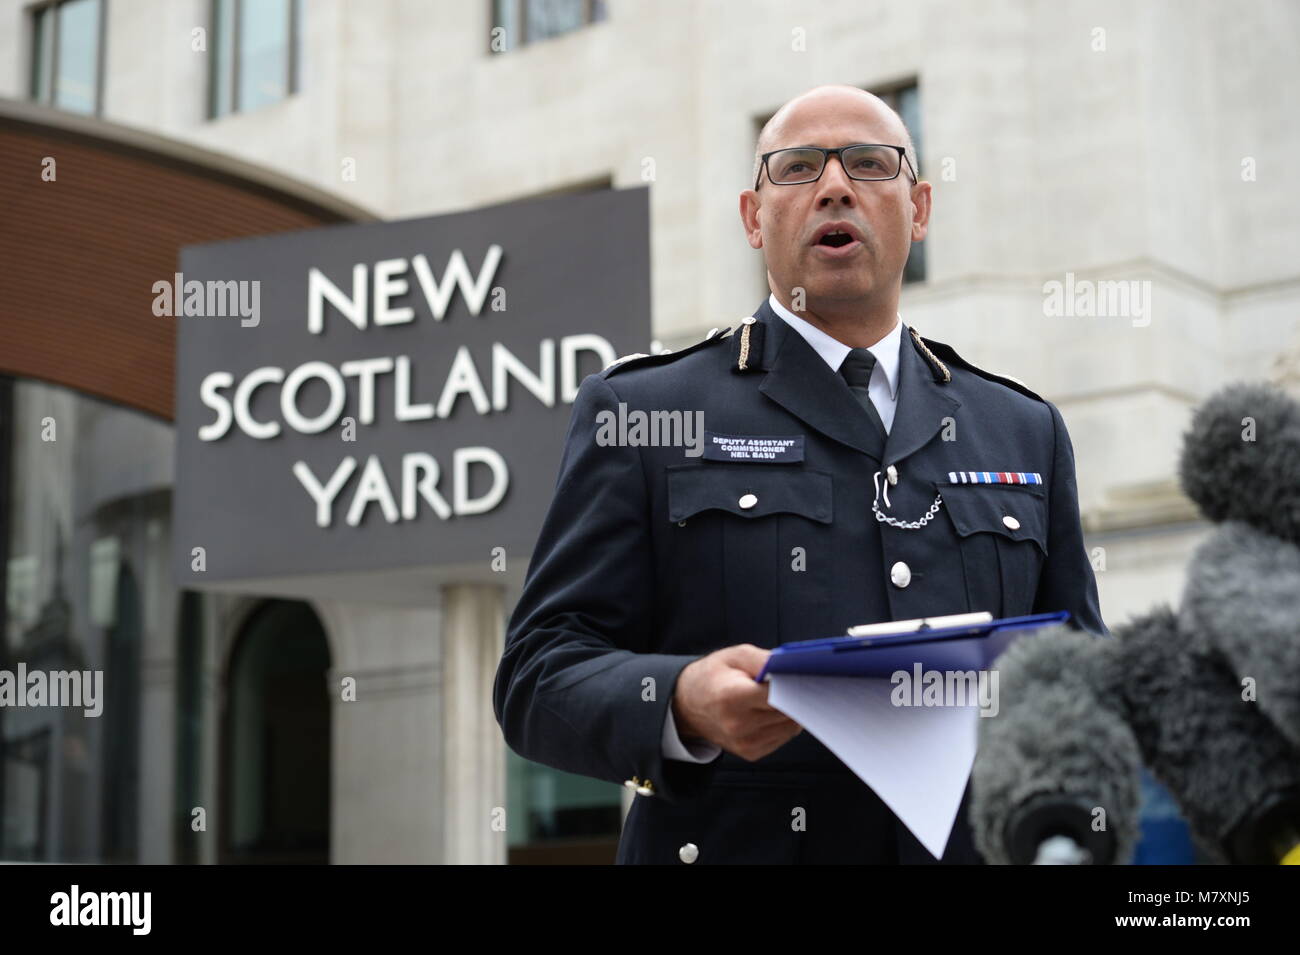 UK's head of counter-terrorism policing Neil Basu, speaking at Scotland Yard, where he explained that the investigators' 'prime focus' is how poison was administered to former Russian double agent Sergei Skripal and his daughter Yulia, as police and members of the armed forces continue to investigate the suspected nerve agent attack in Salisbury. Stock Photo